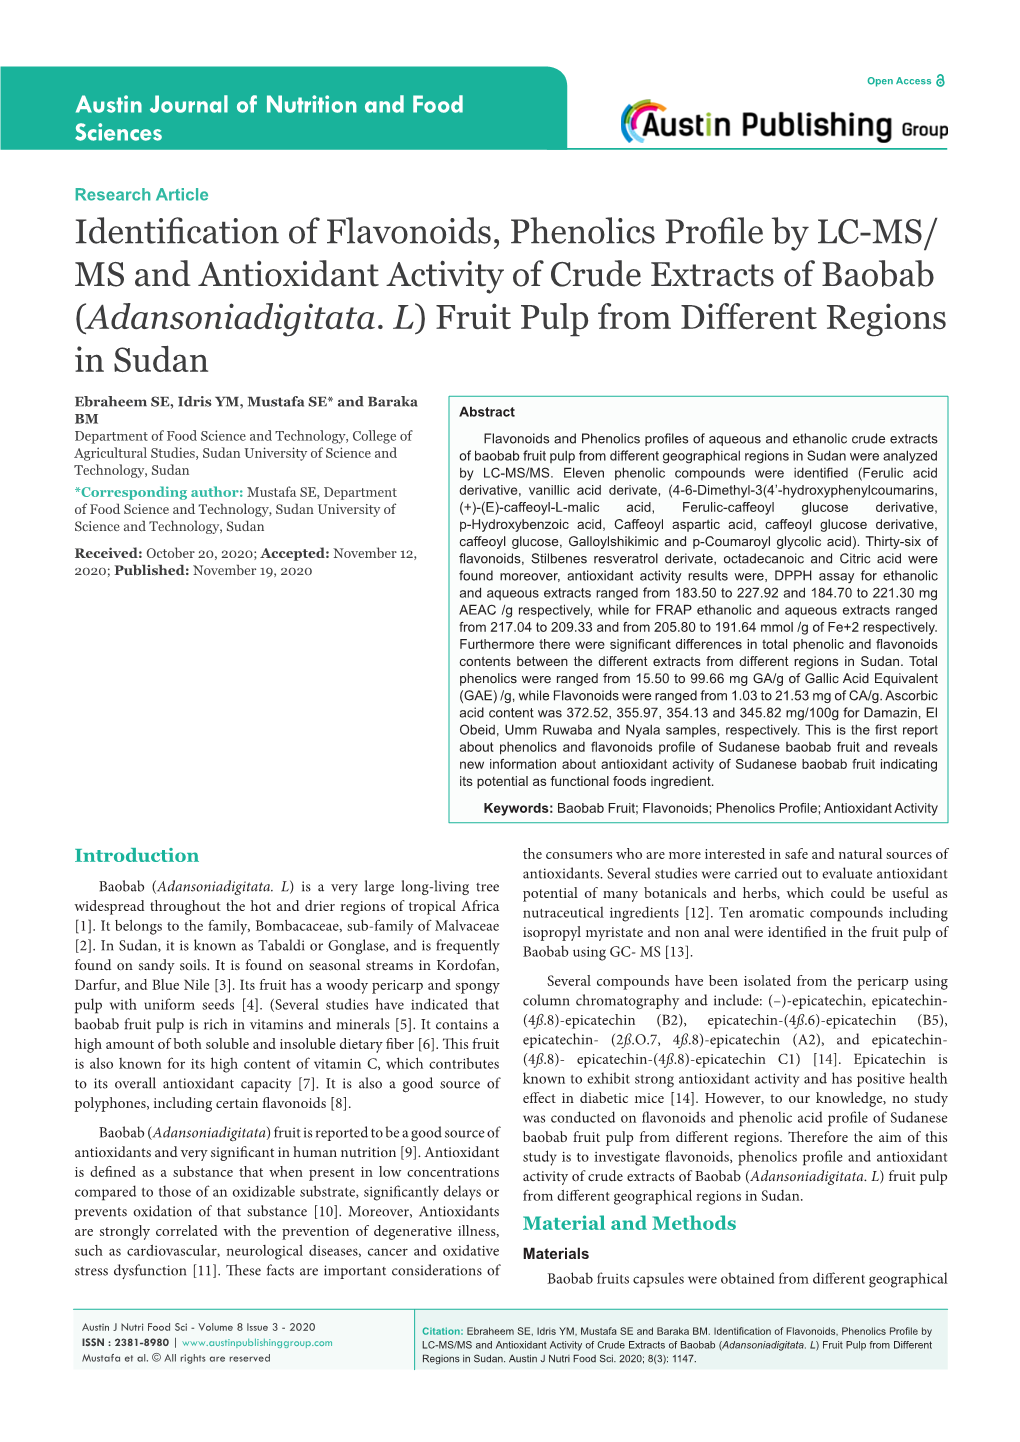 Identification of Flavonoids, Phenolics Profile by LC-MS/ MS and Antioxidant Activity of Crude Extracts of Baobab (Adansoniadigitata